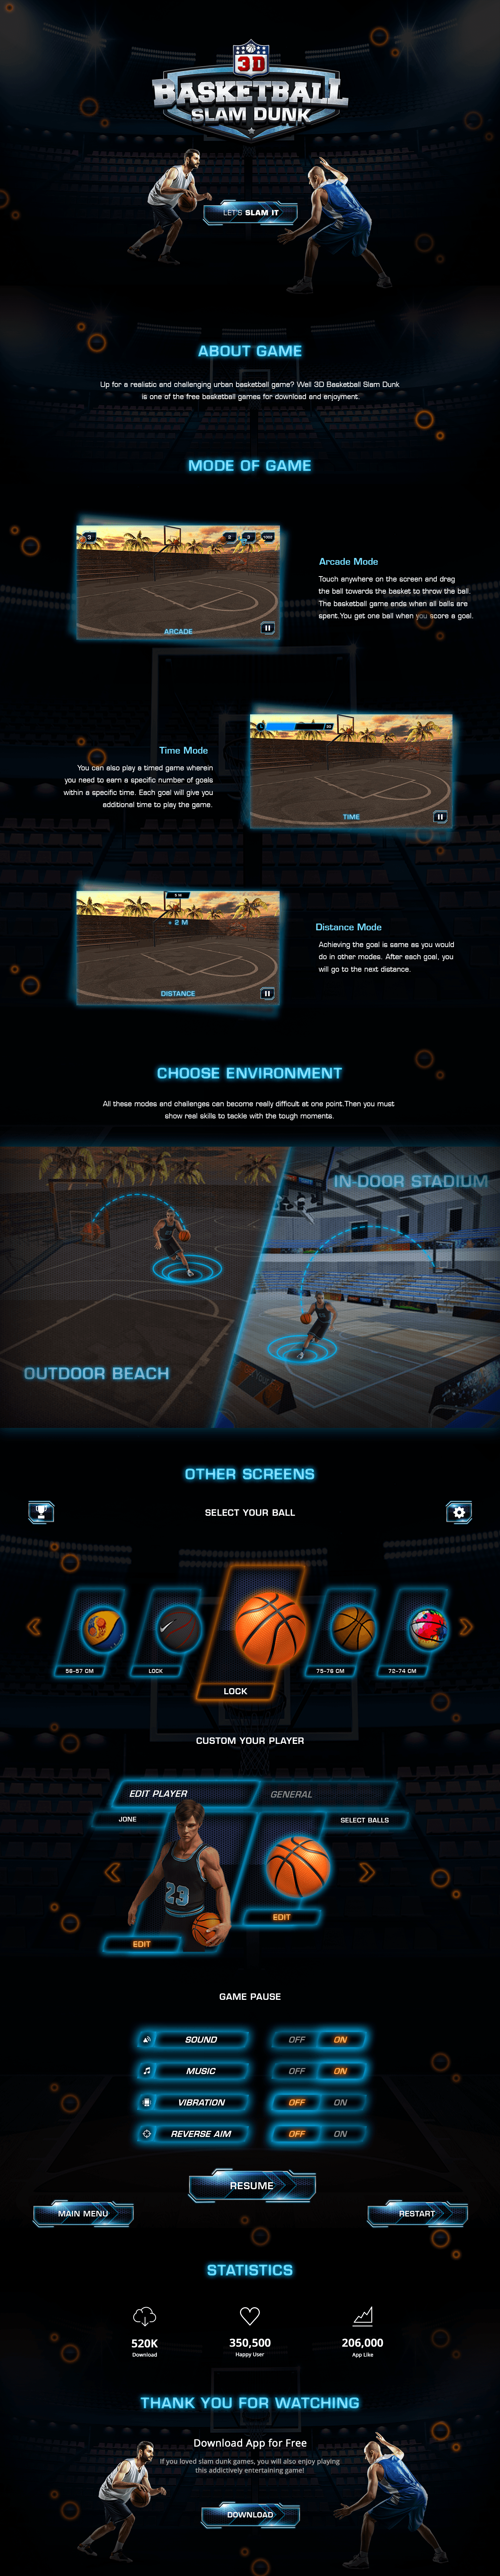 Up for a realistic and challenging multiplayer basketball game? Well 3D Basketball Slam Dunk is one of the free basketball games for download and enjoyment.